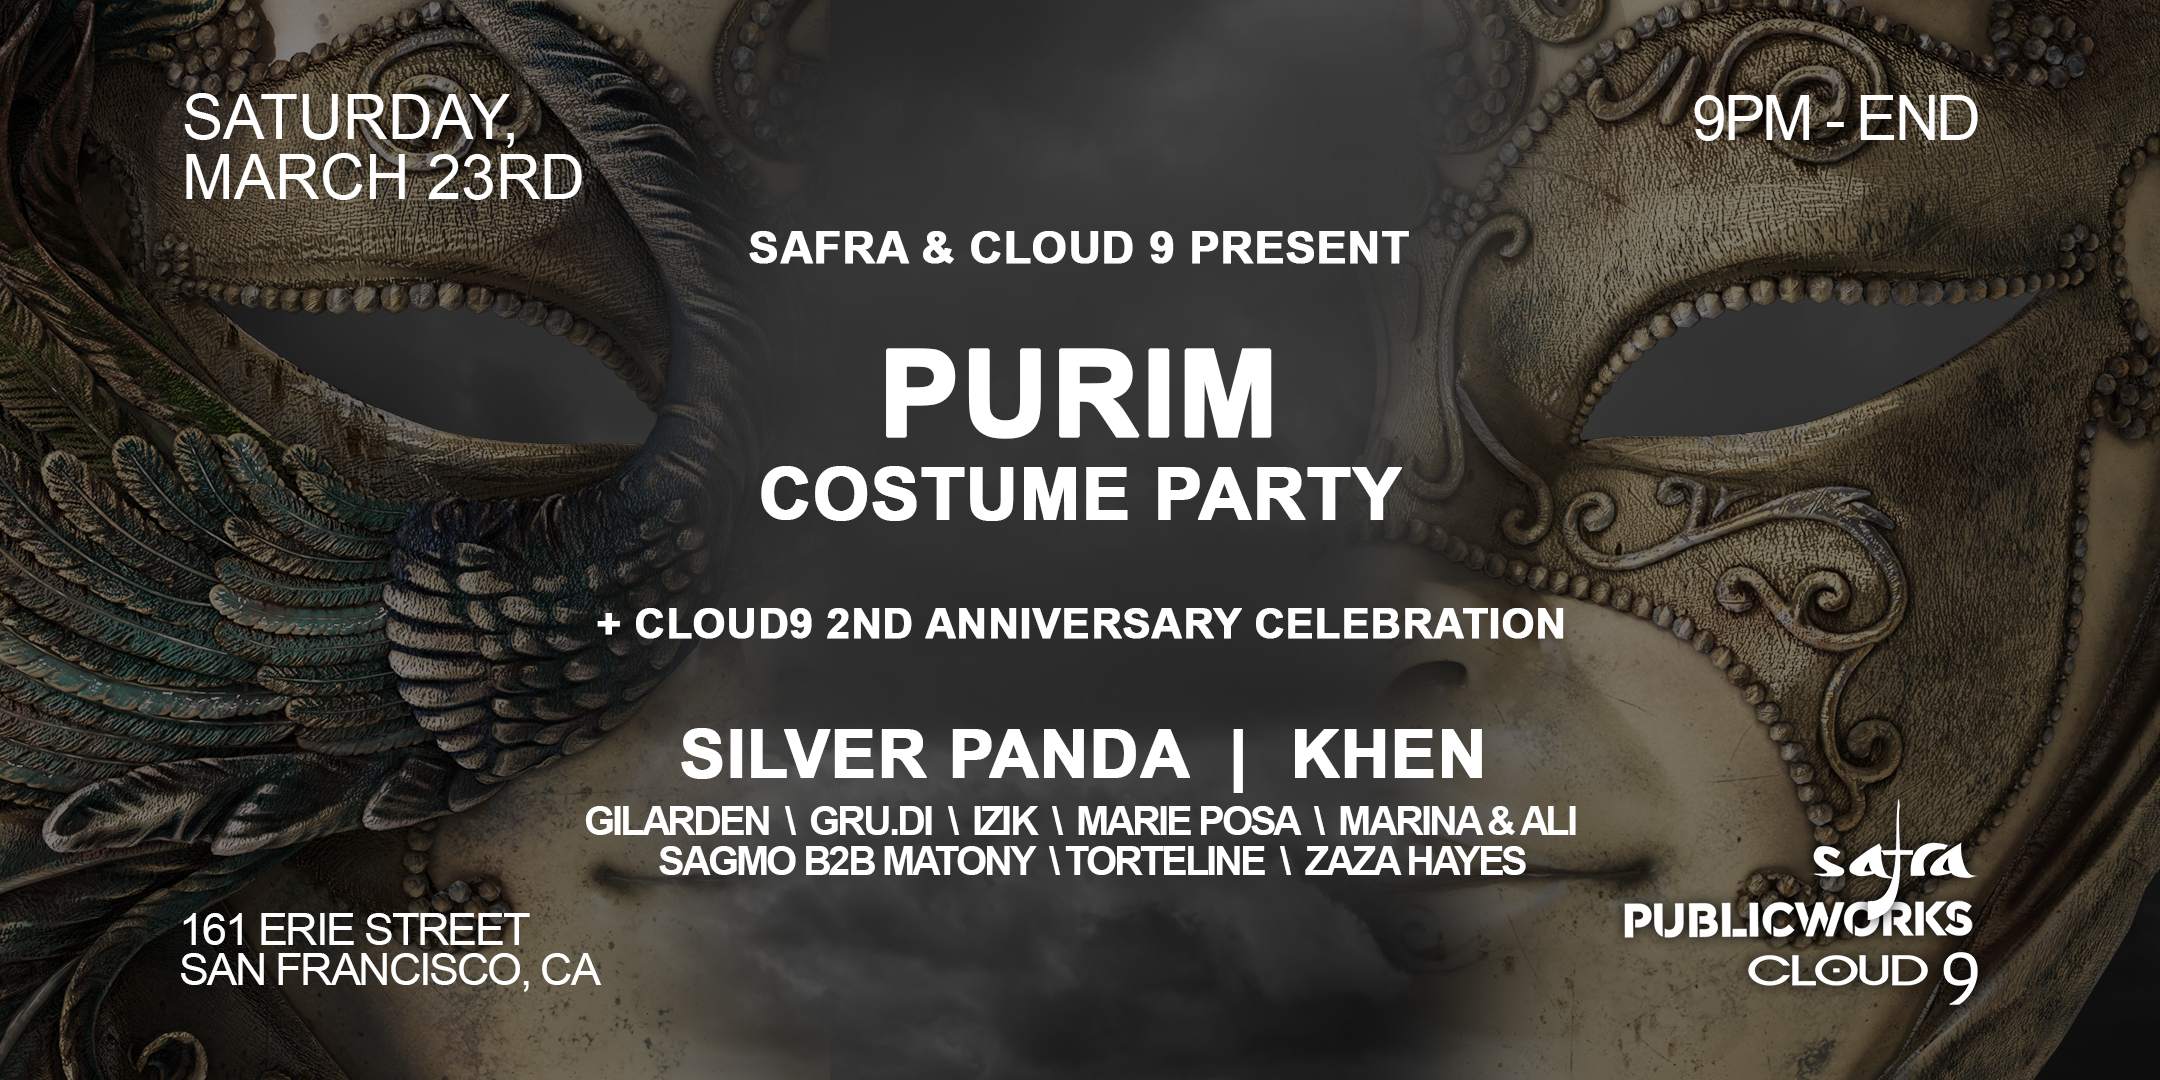 Safra & Cloud9 present Purim (Costume Party) with Silver Panda - Página frontal